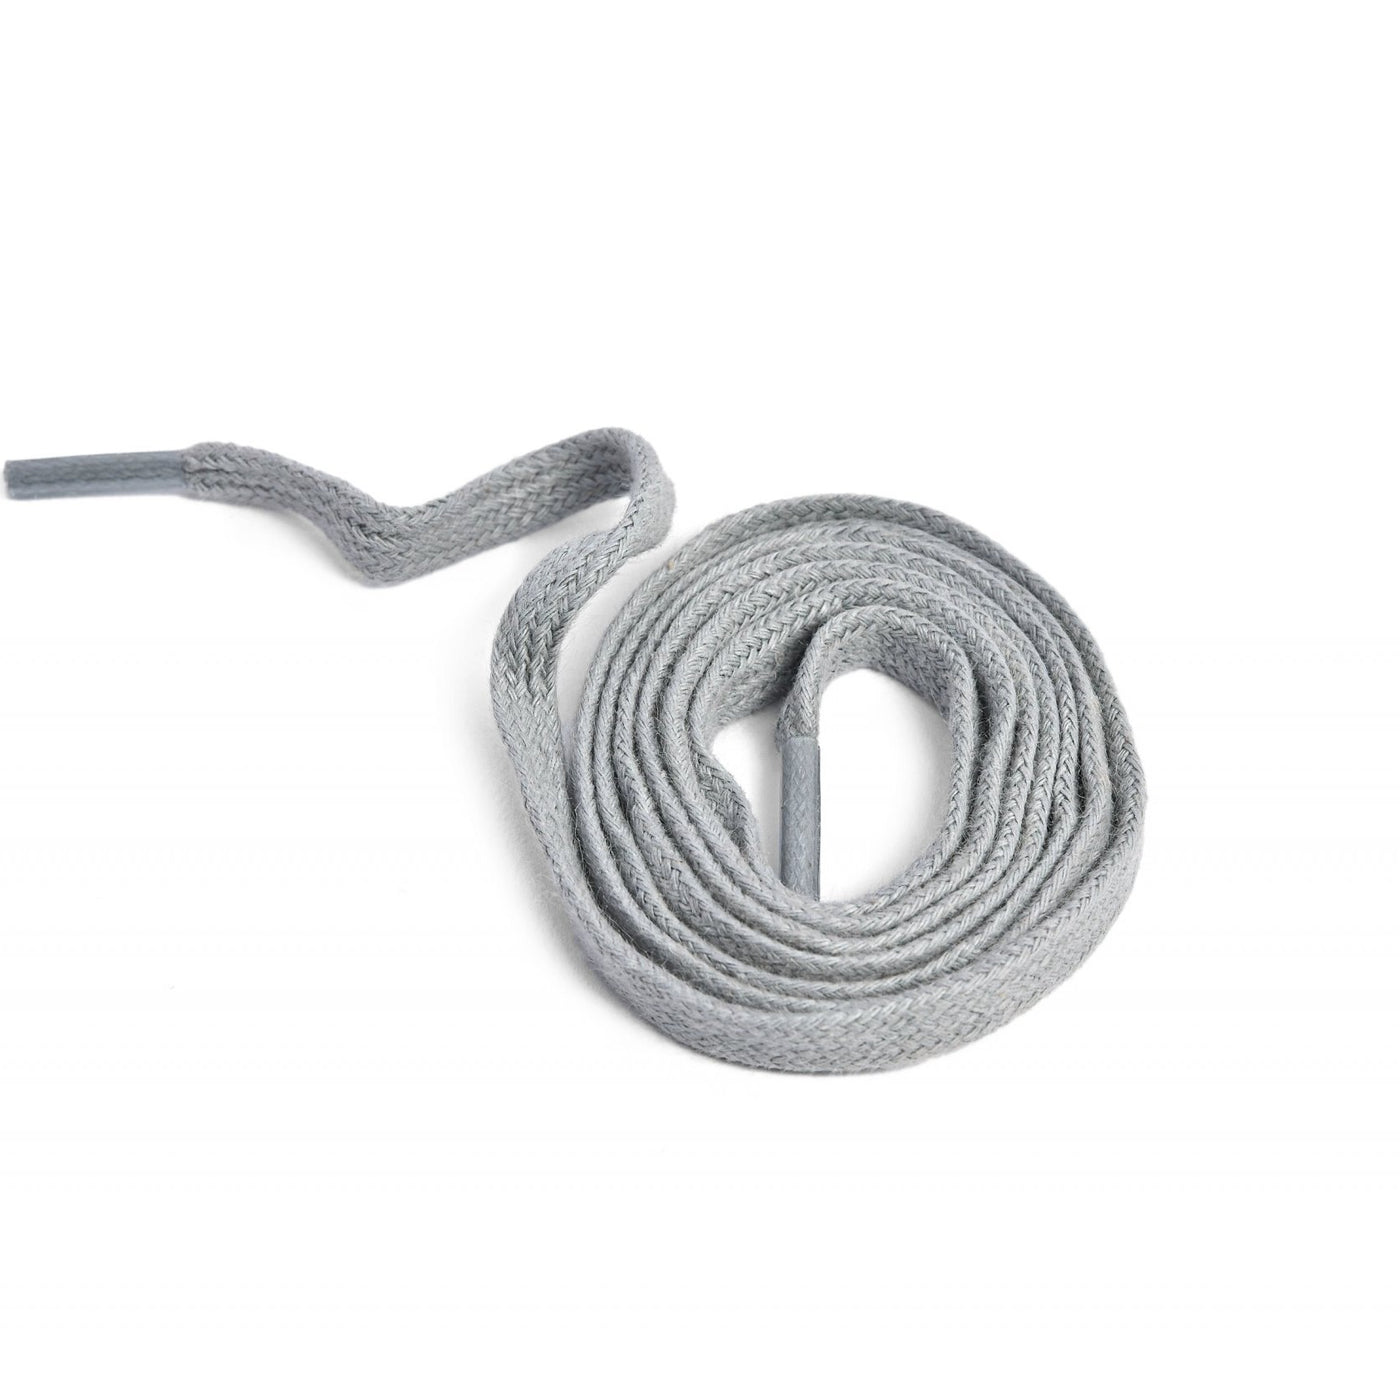 Flat Tip Sneaker Laces - Grey